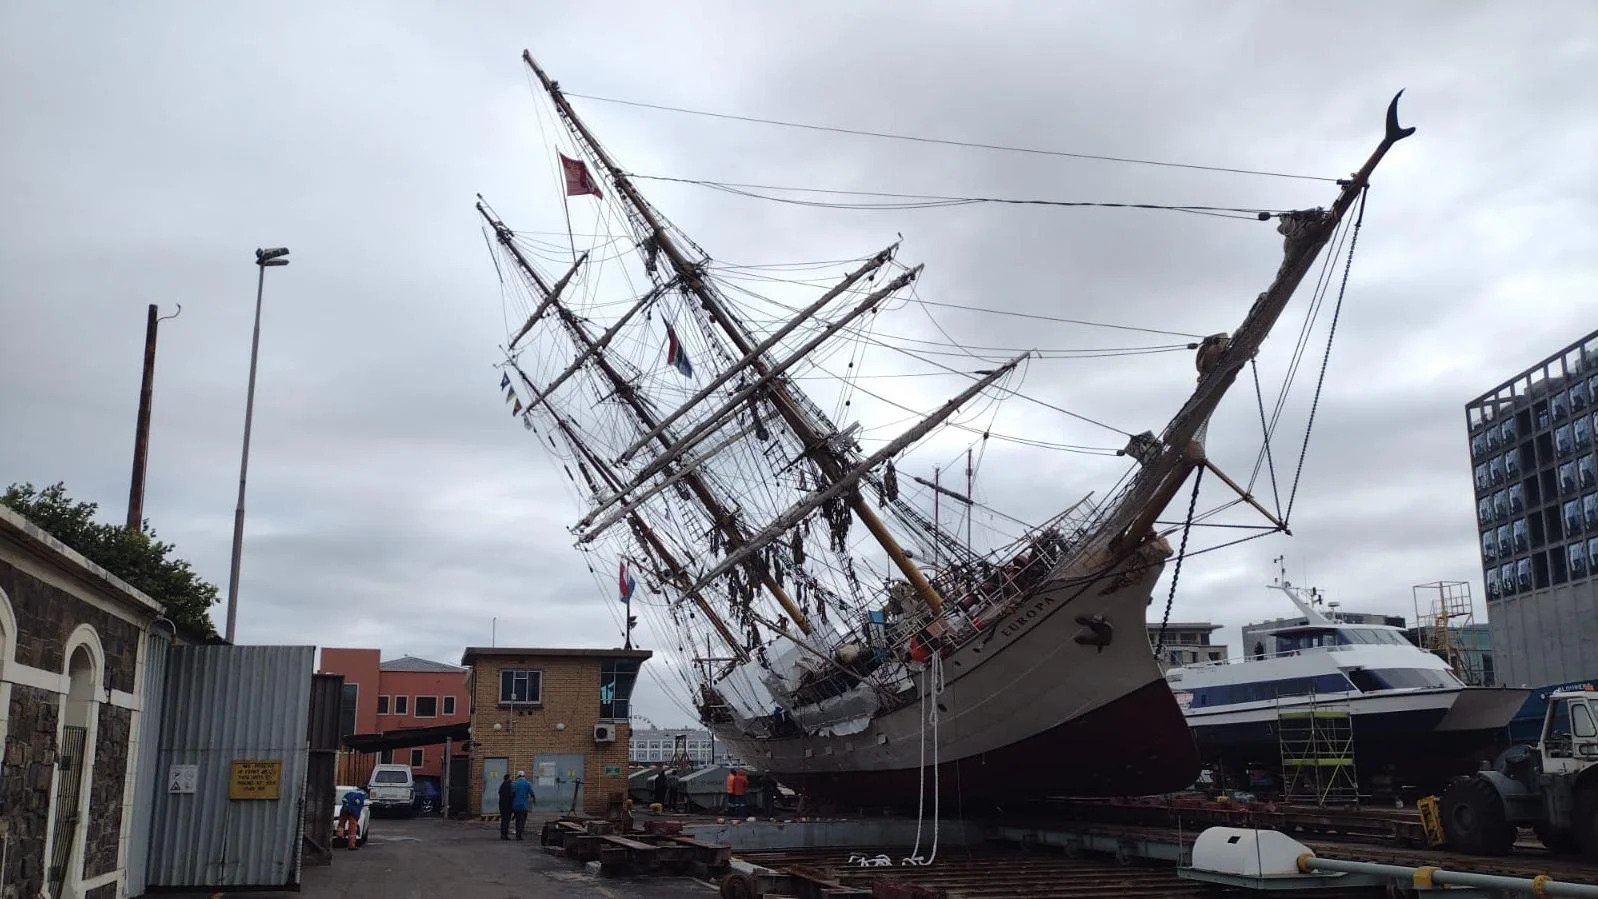 The 112-year-old tall ship, Bark Europa, toppled over during maintenance in a drydock